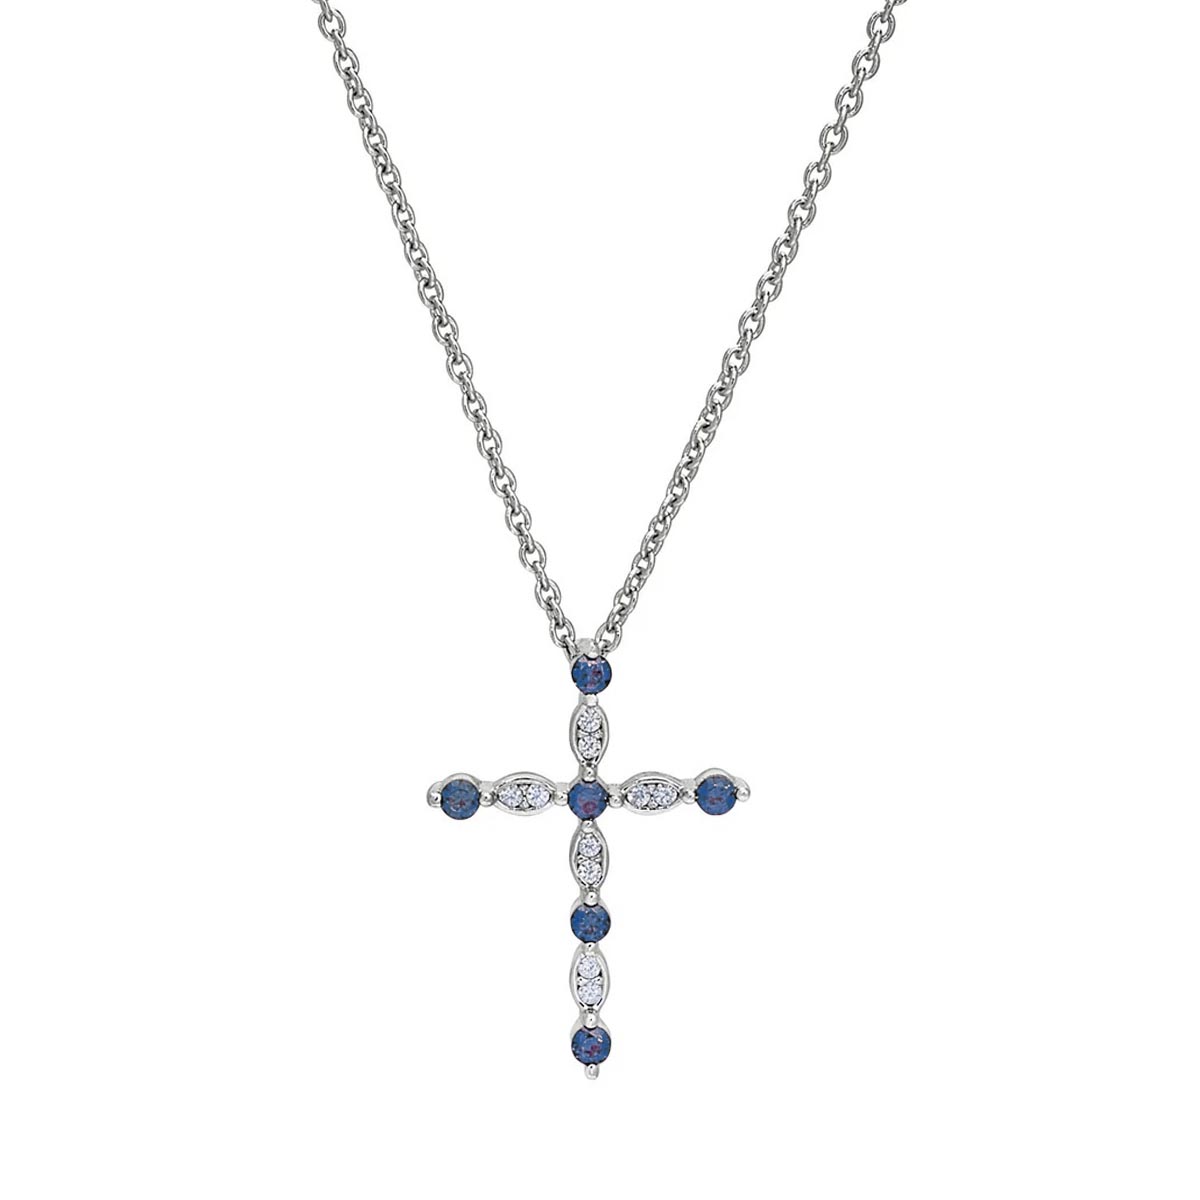 Cubic Zirconia Sept Cross Necklace in Sterling Silver